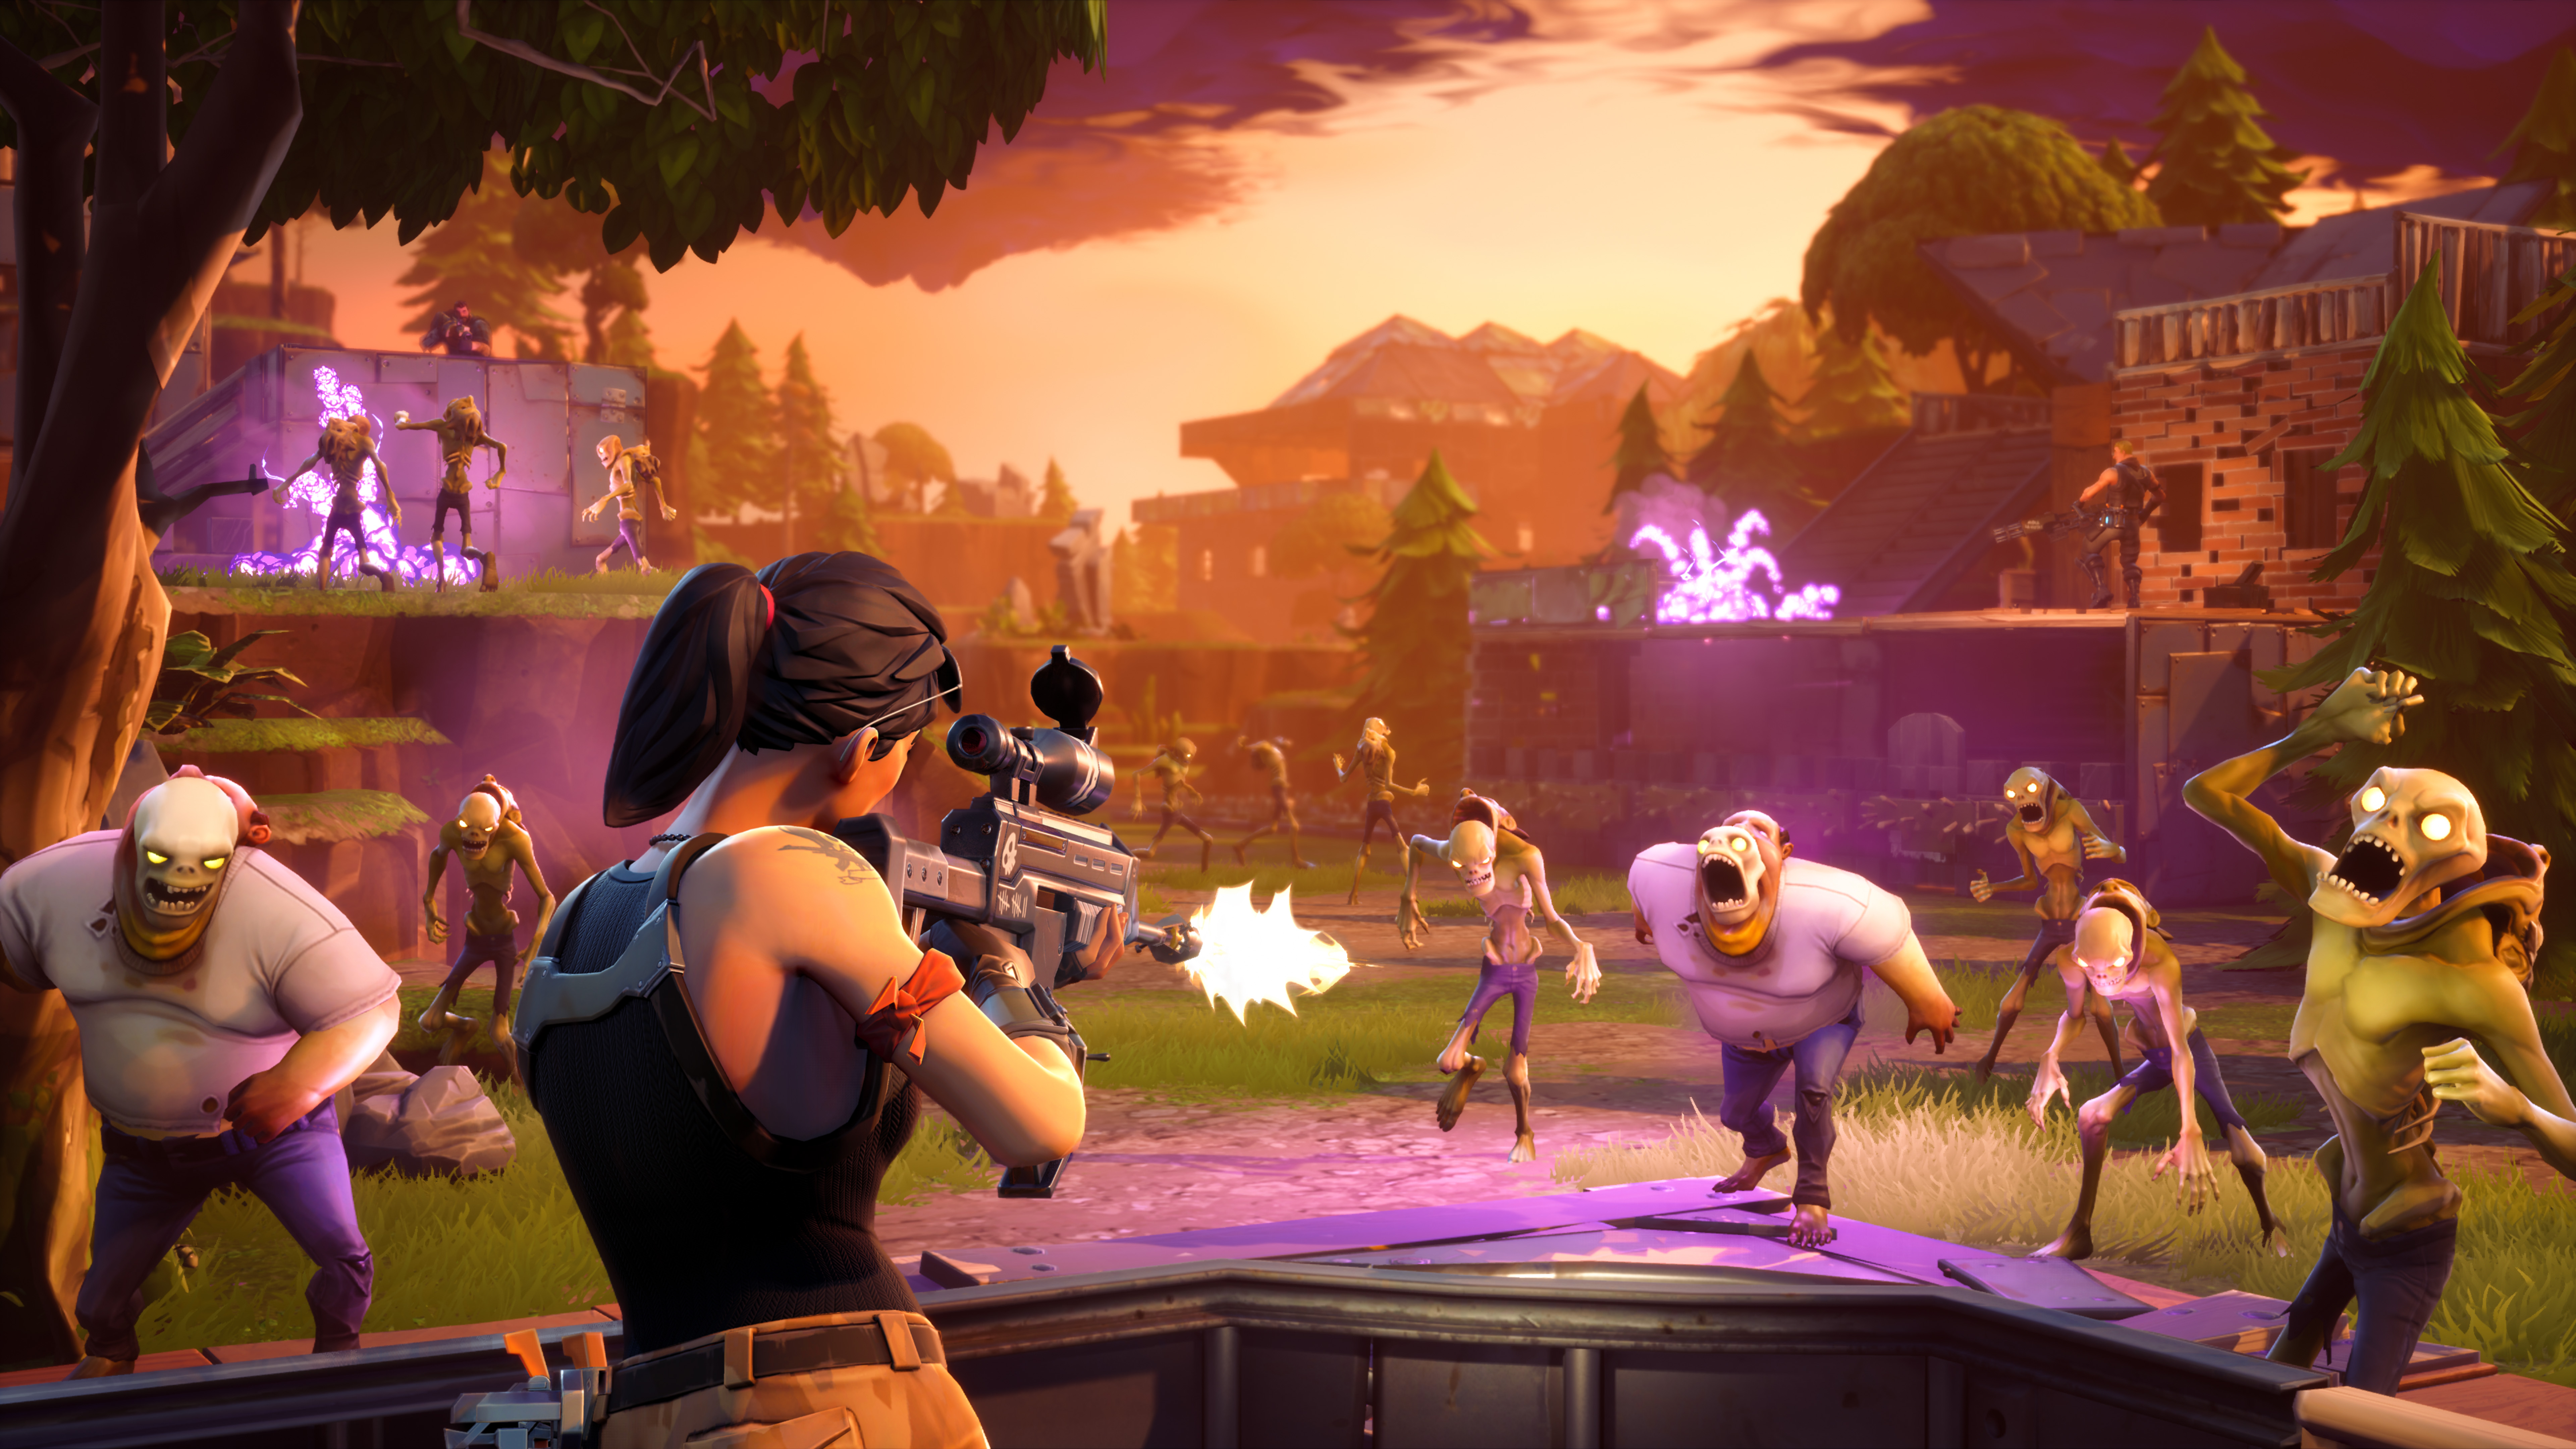 enlarge at its best fortnite looks and feels like this nicely staged promo pic of in game action however so many free to play annoyances drag this - free fortnite content